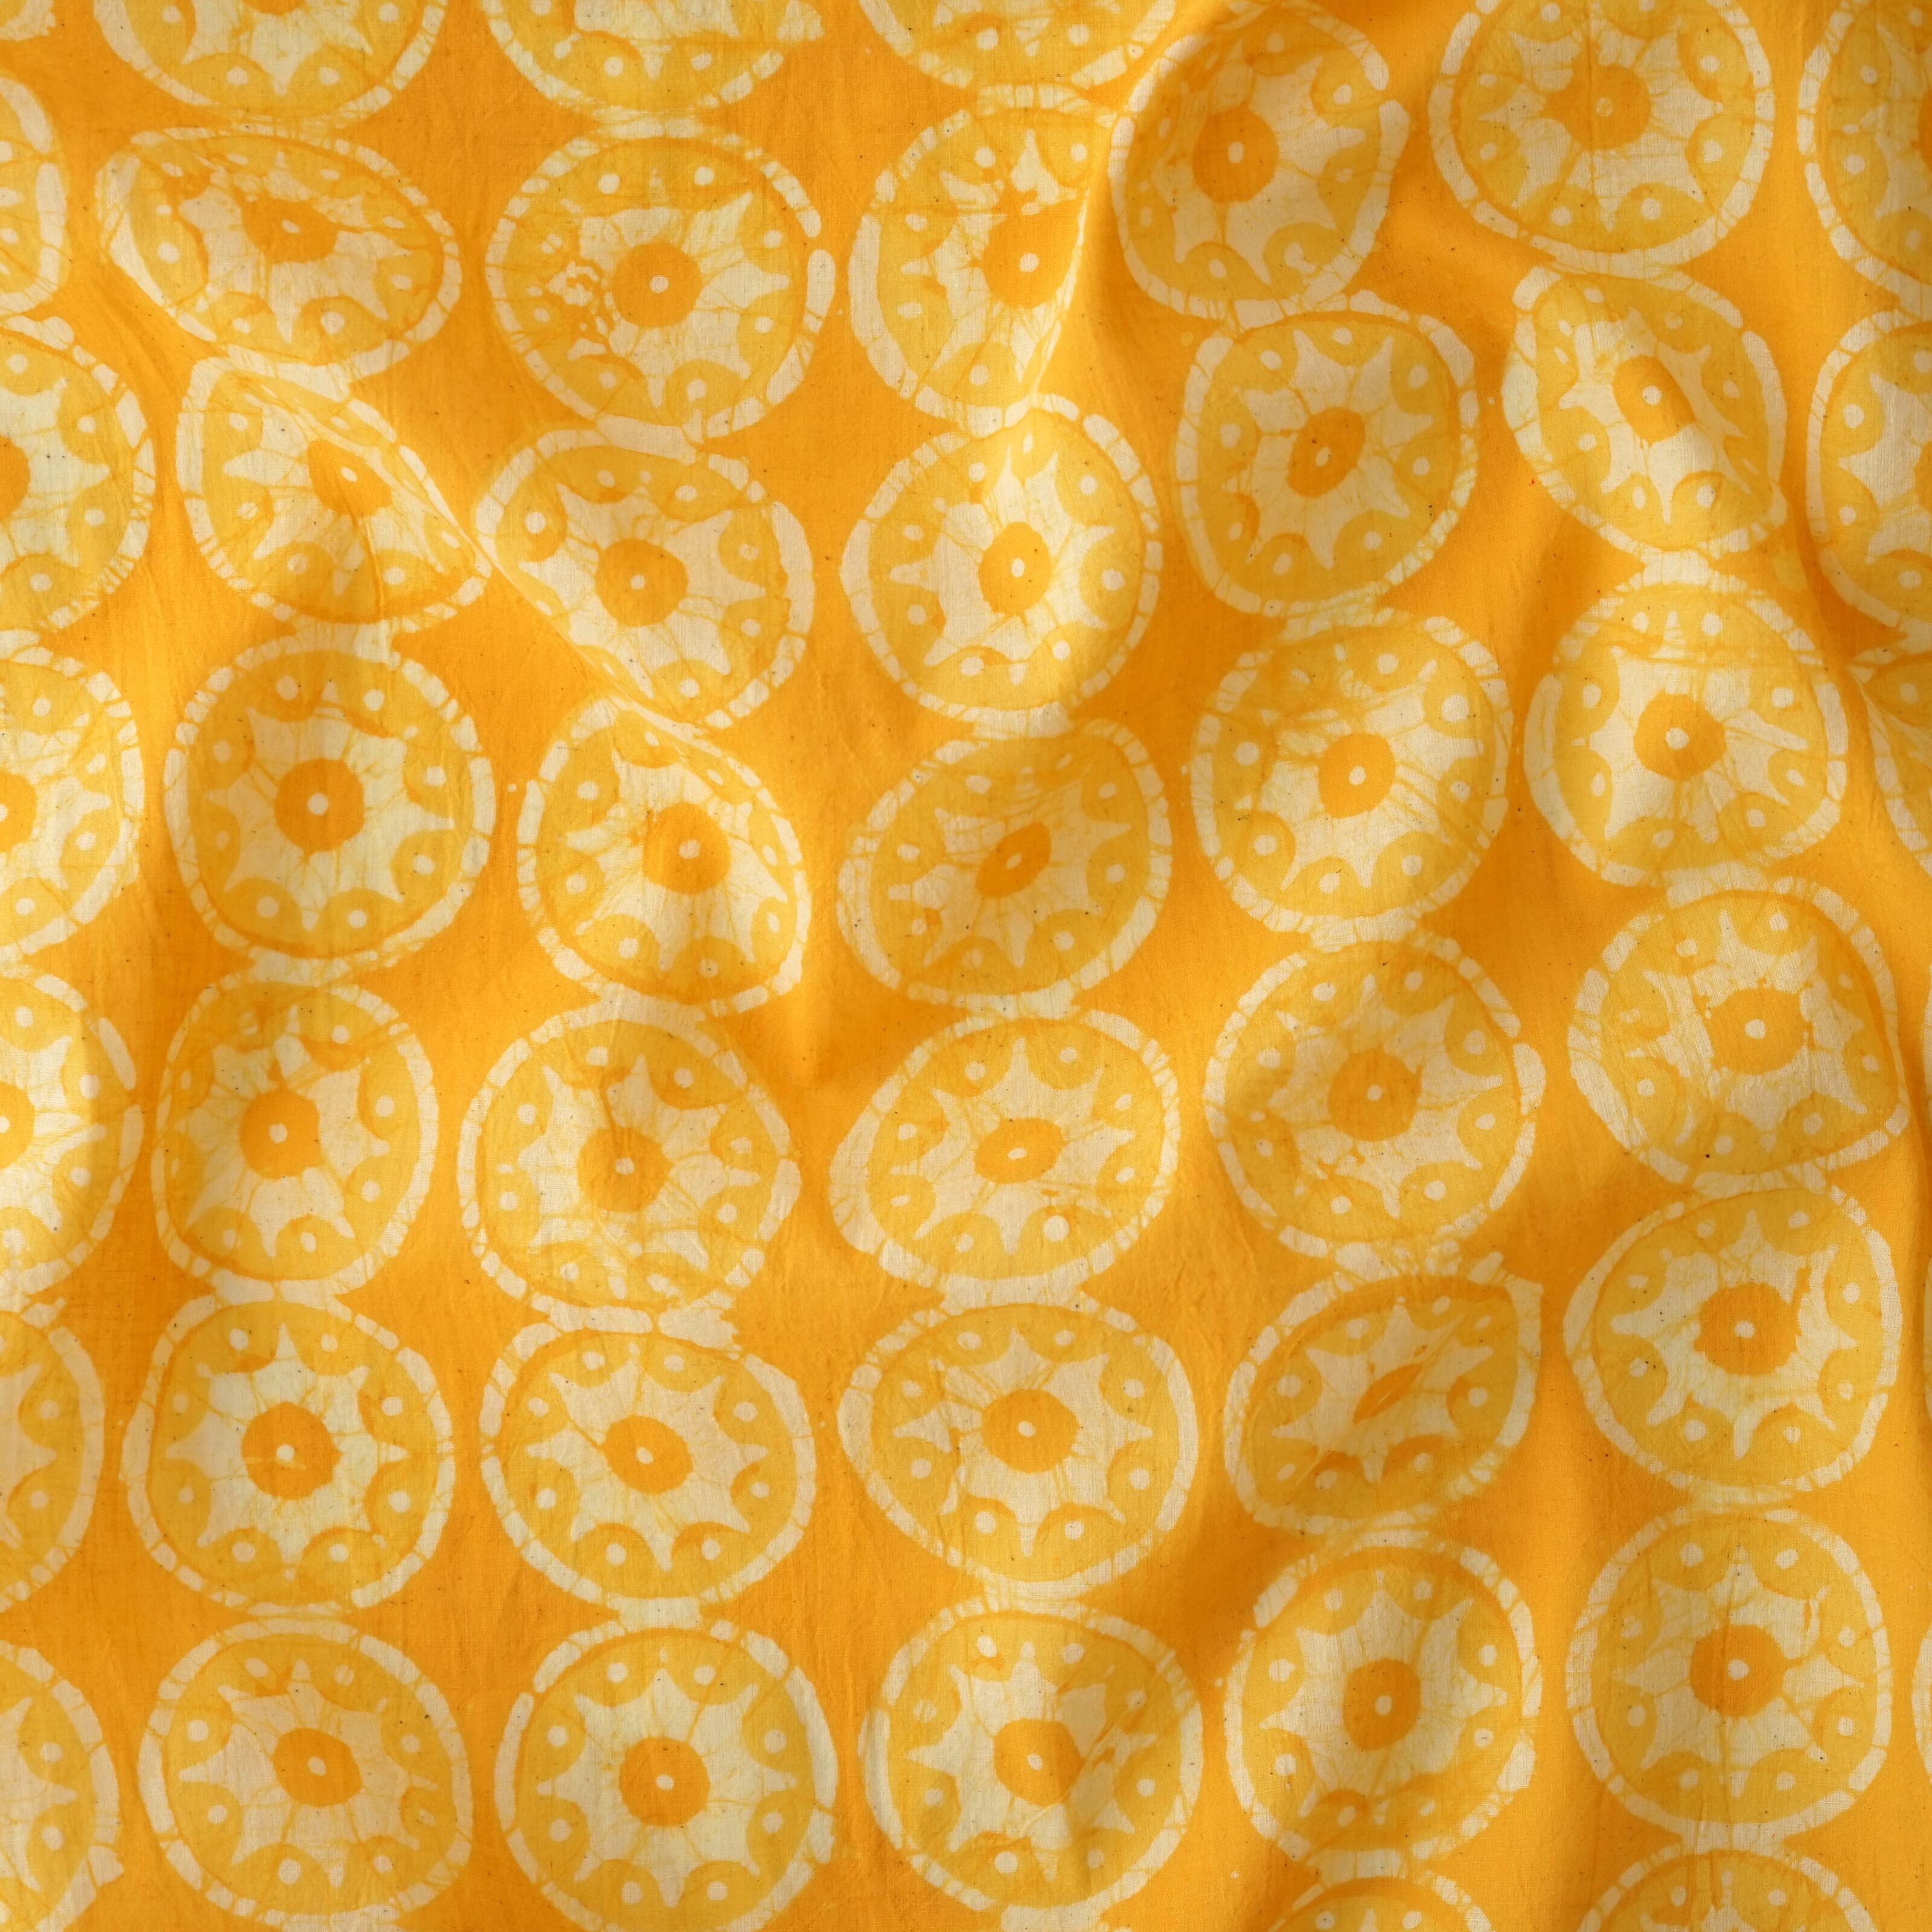 100% Block-Printed Batik Cotton Fabric From India - Sunkissed Design - Yellow Dye - Contrast